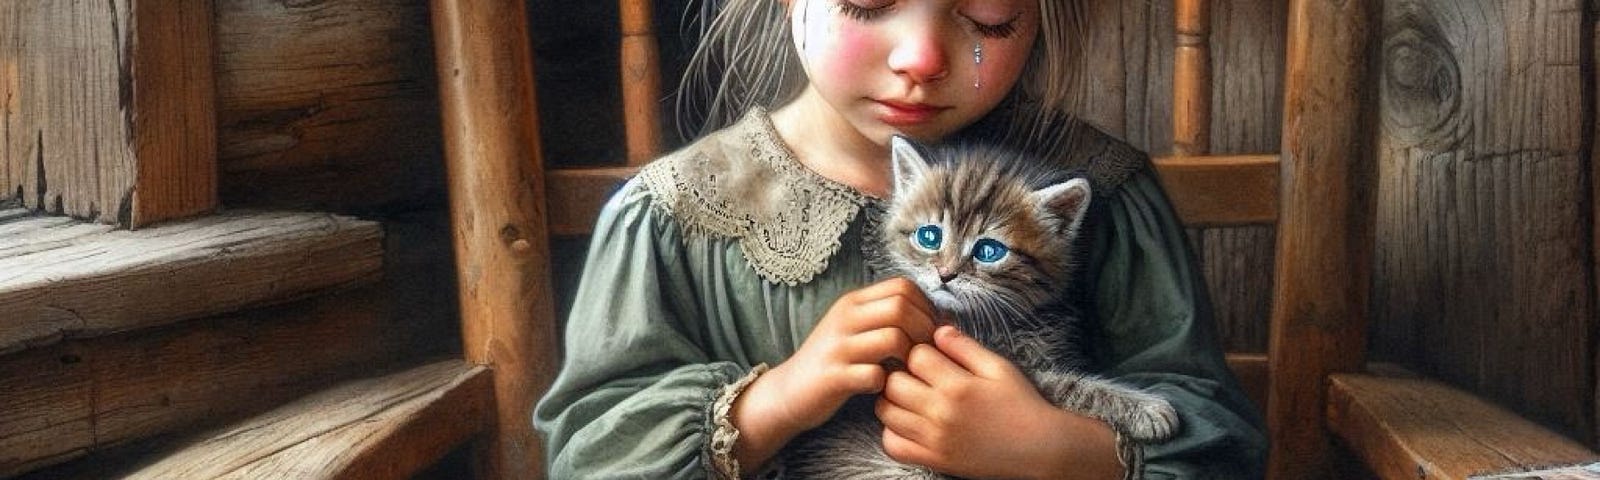 a young girl sitting in a wood chair in a rustic cabin holding a tiny kitten to her cheek. girl’s eyes are closed. a tear is falling from her eye. a patchwork quilt lays across her lap.